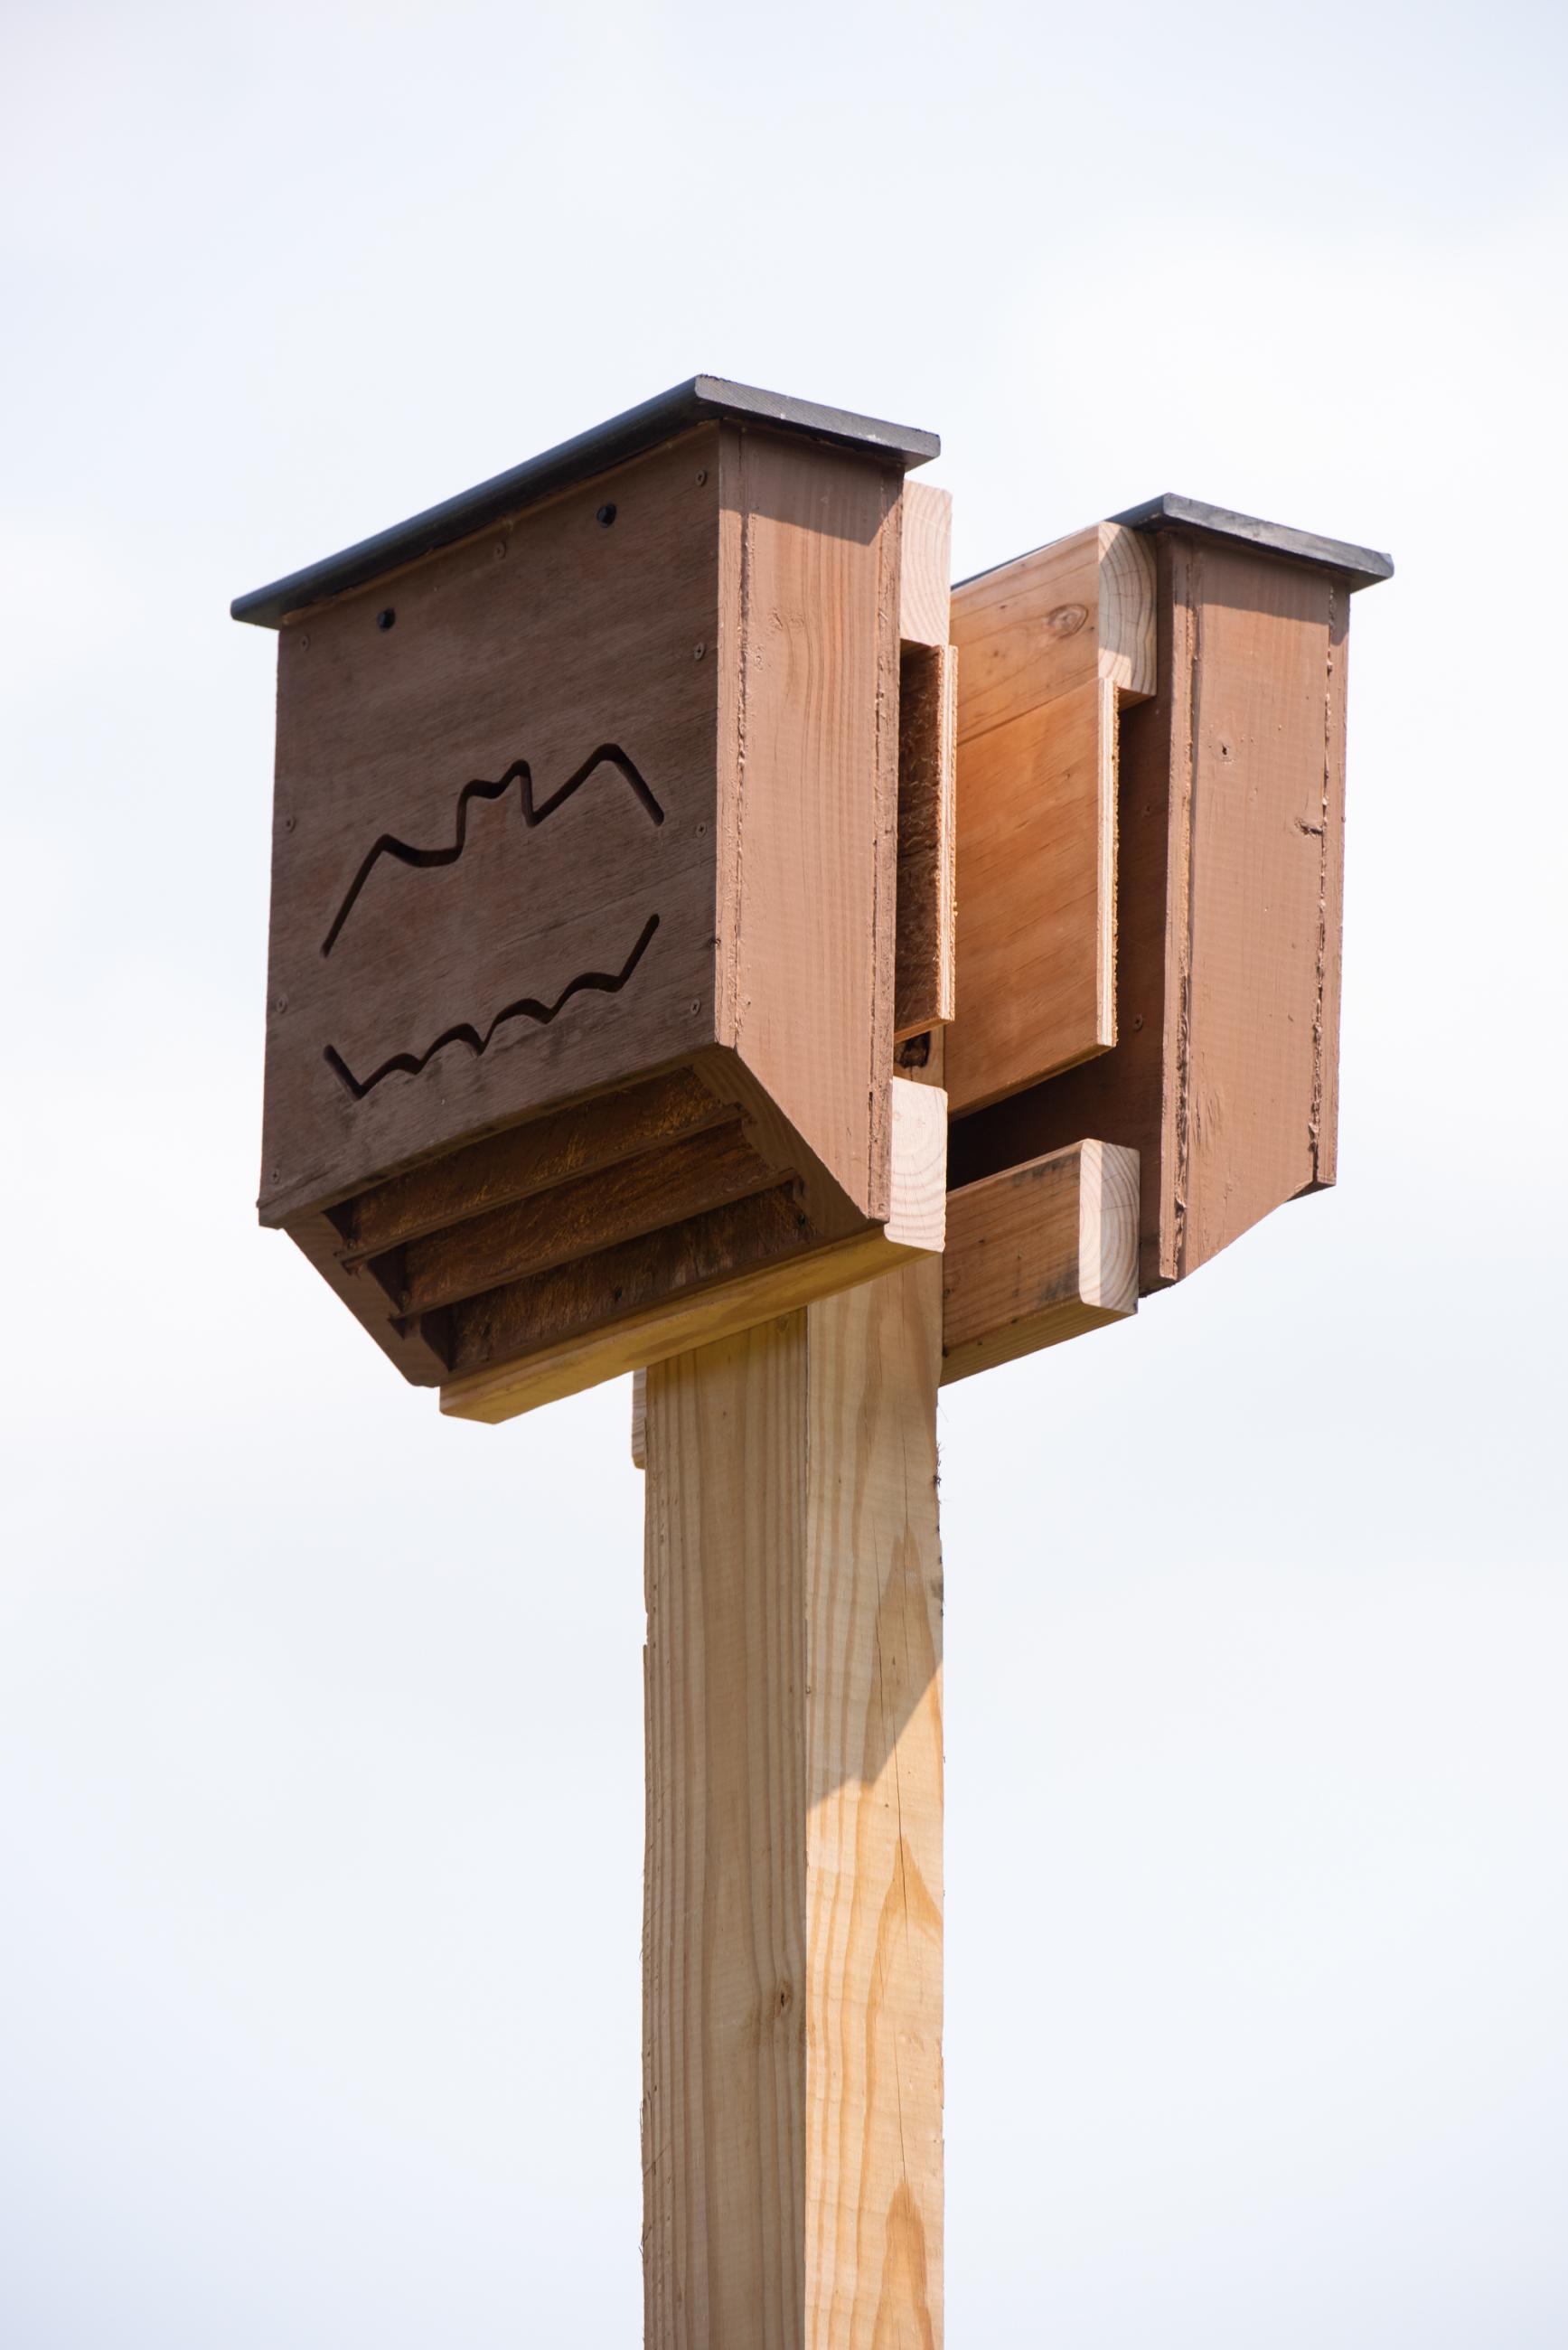 A bat house on a wooden post with the sky behind it.